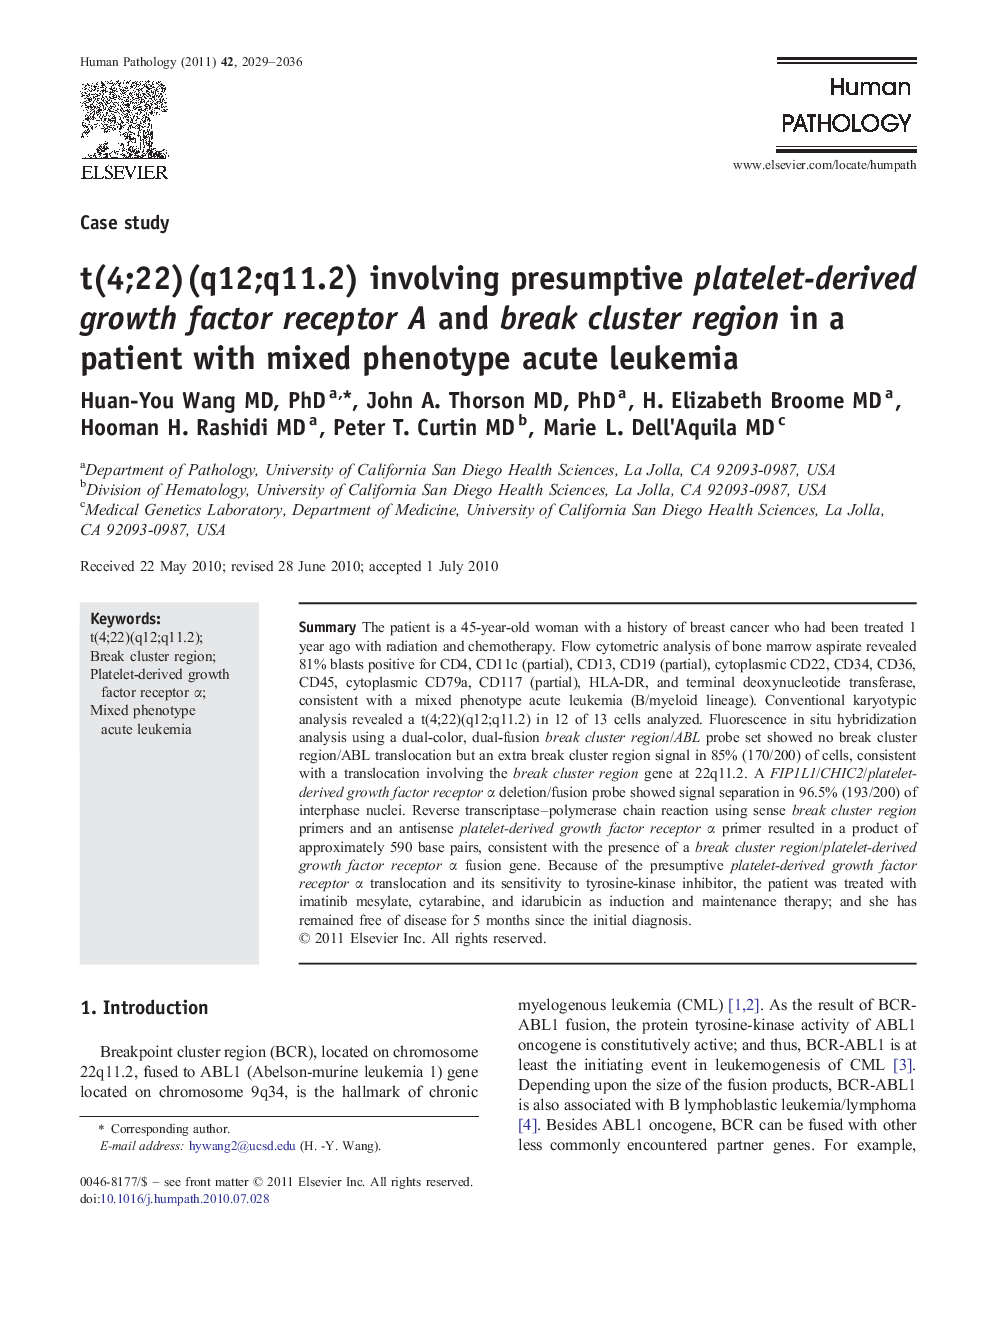 t(4;22)(q12;q11.2) involving presumptive platelet-derived growth factor receptor A and break cluster region in a patient with mixed phenotype acute leukemia